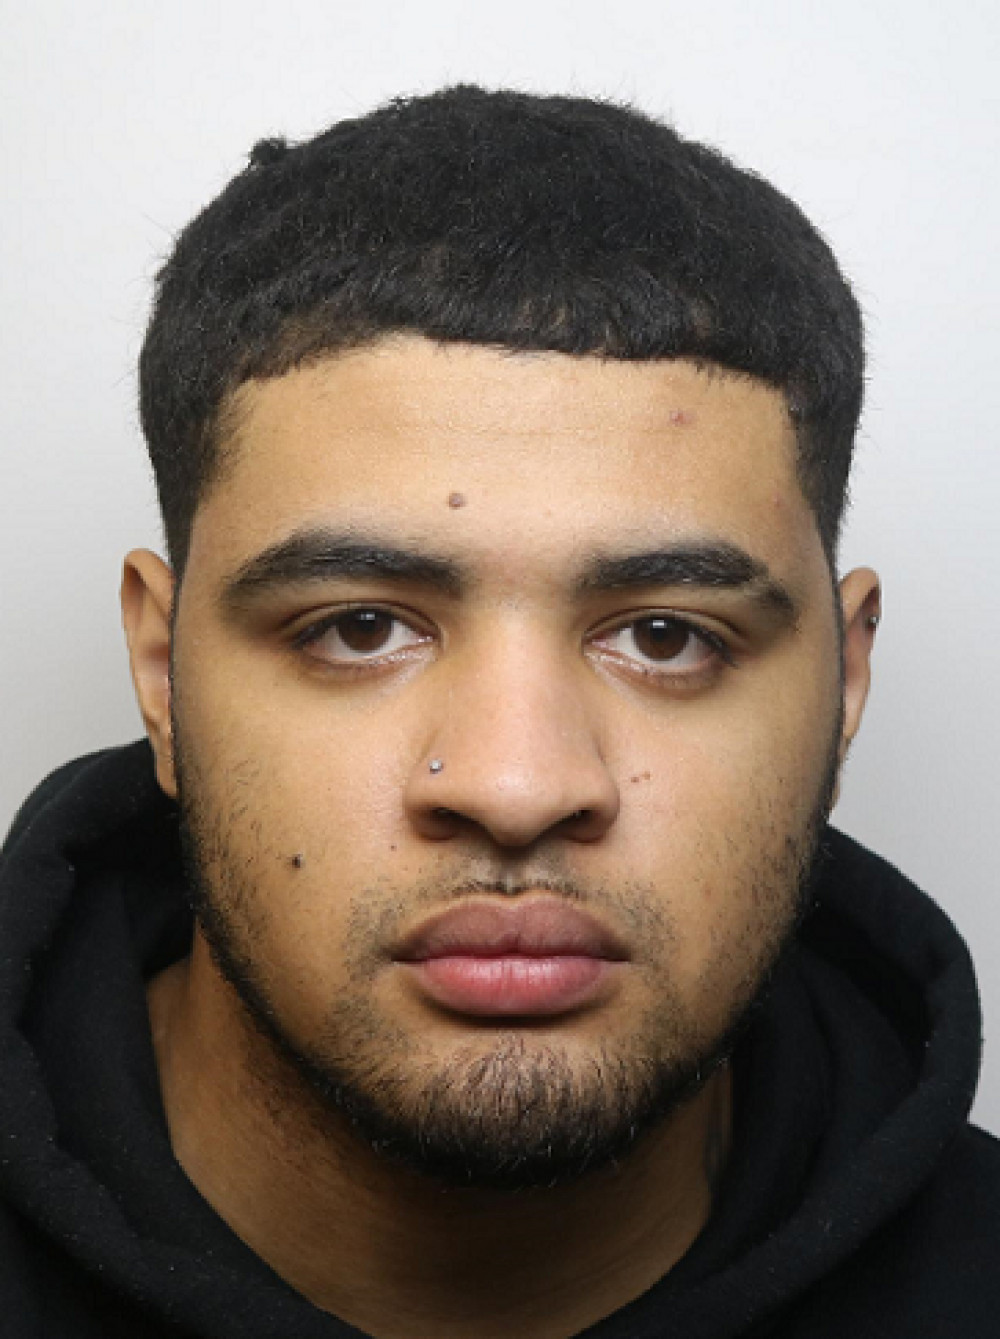 Deneil Walker lured a child to Northolt Station to sexually assault her aboard a train